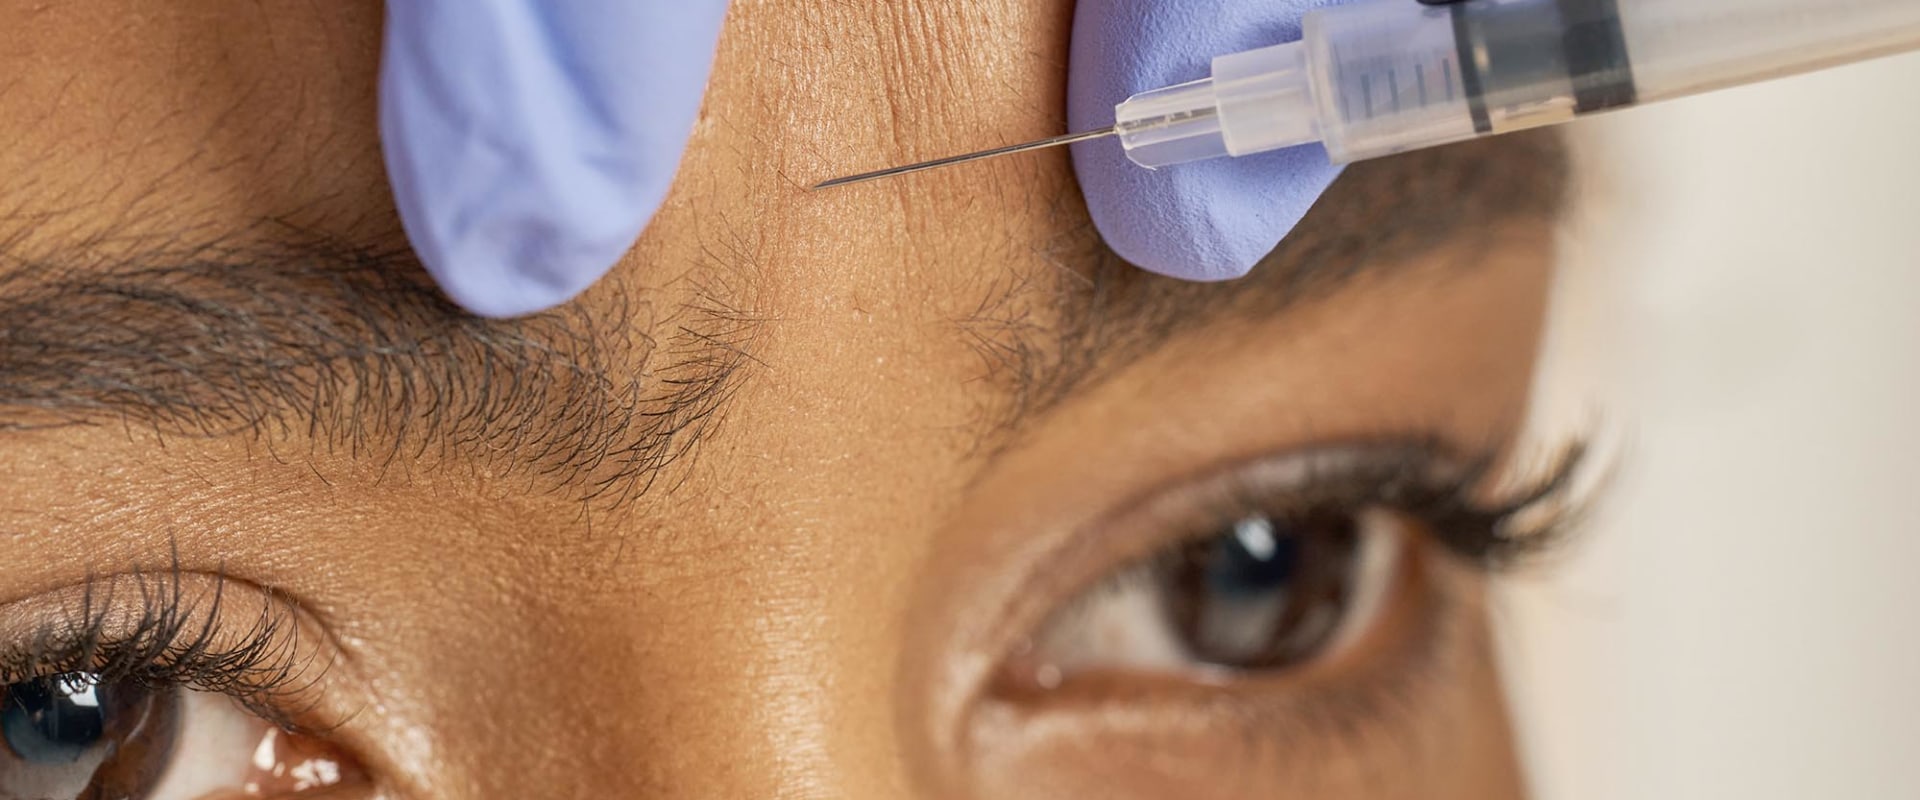 Botox vs Dermal Fillers: Which is Better for You?